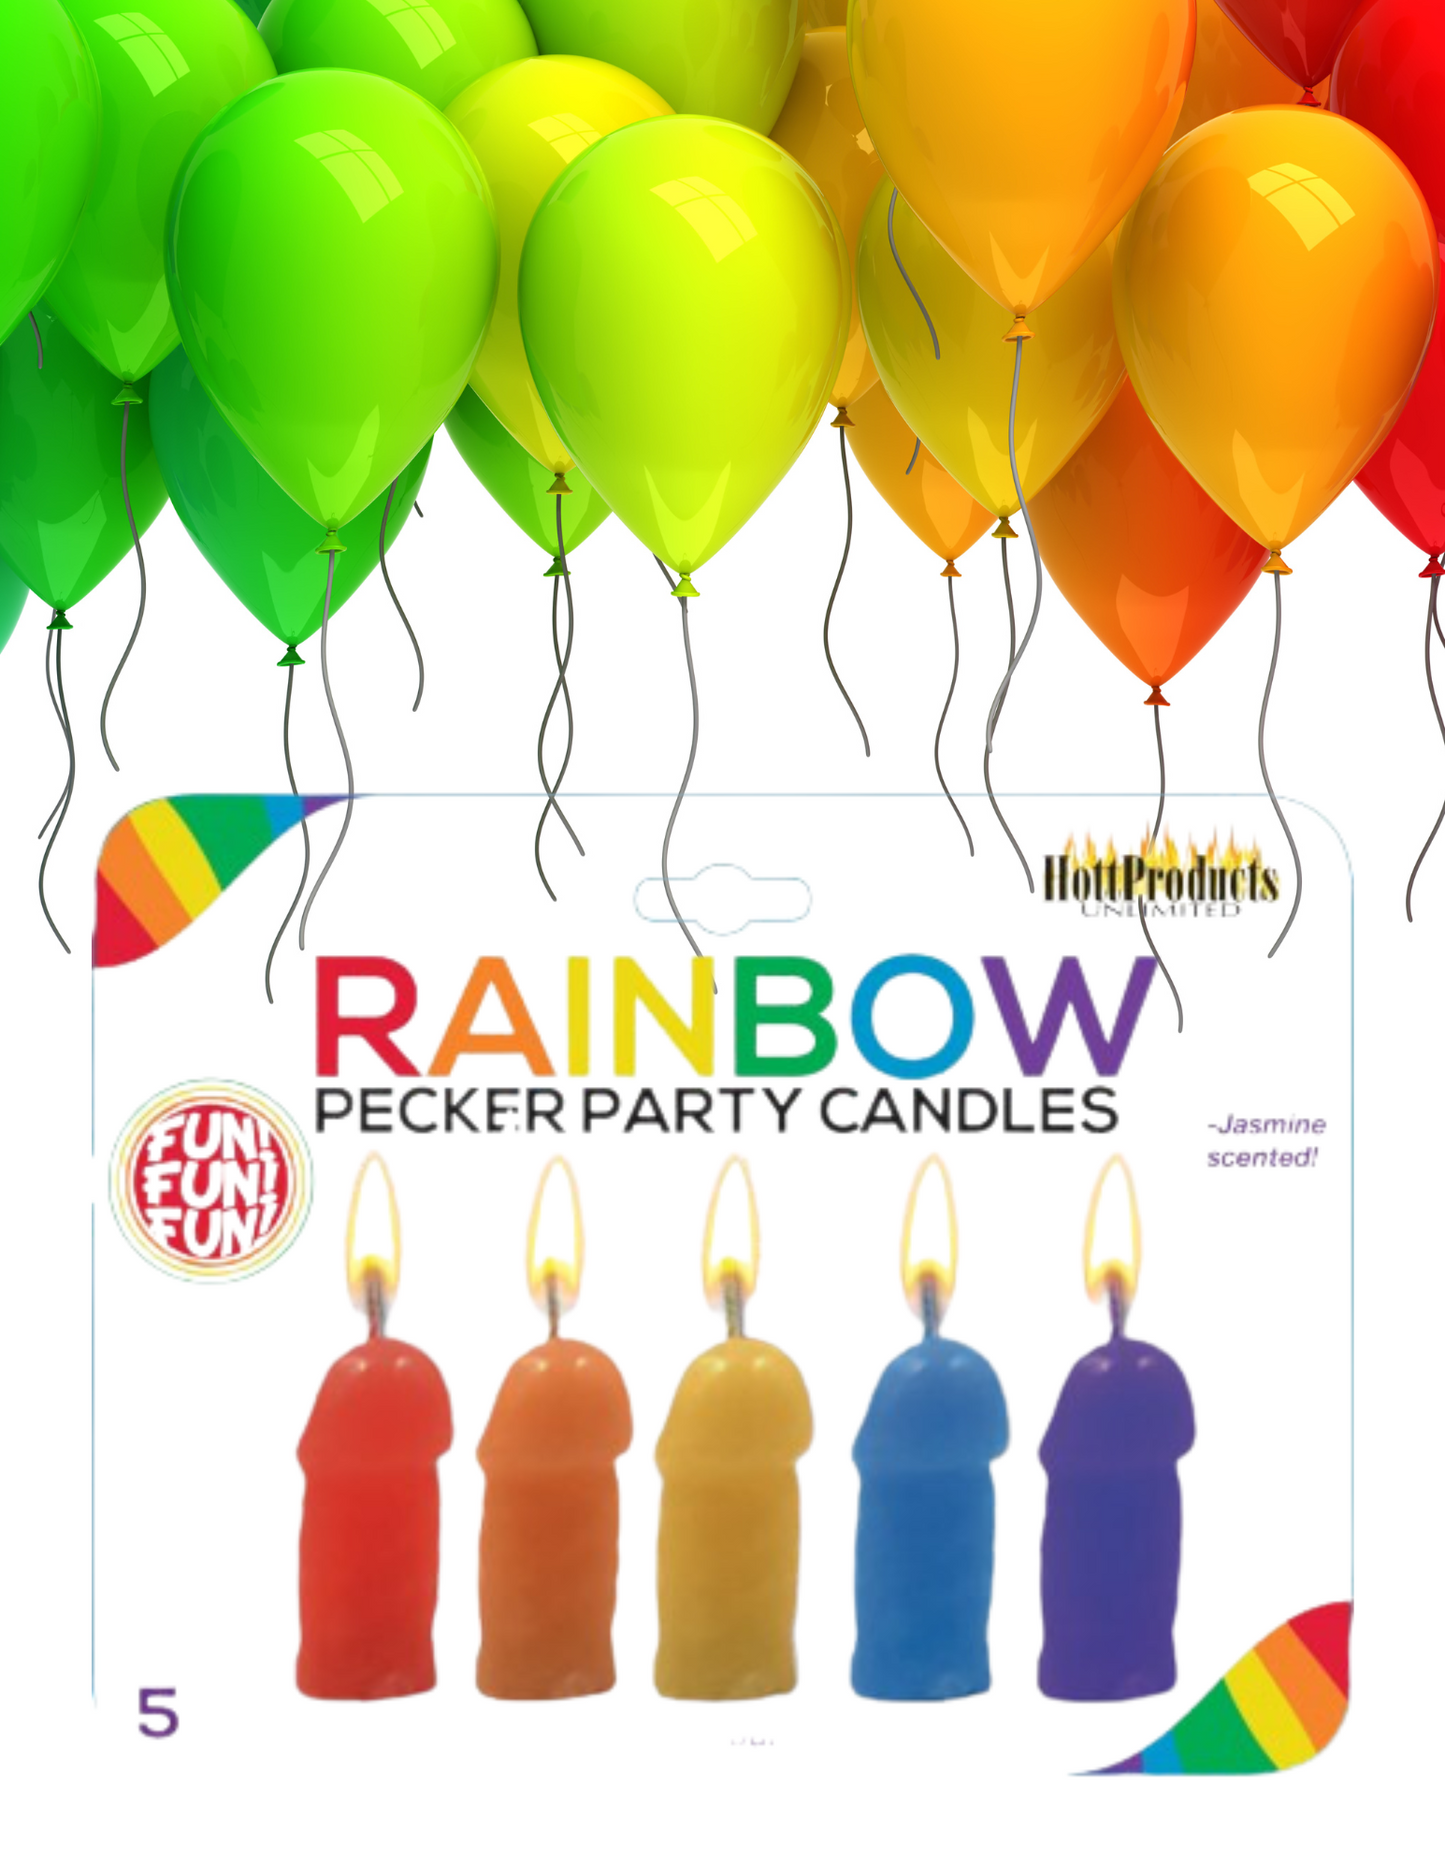 Hott Products Rainbow Pecker Party Candles.